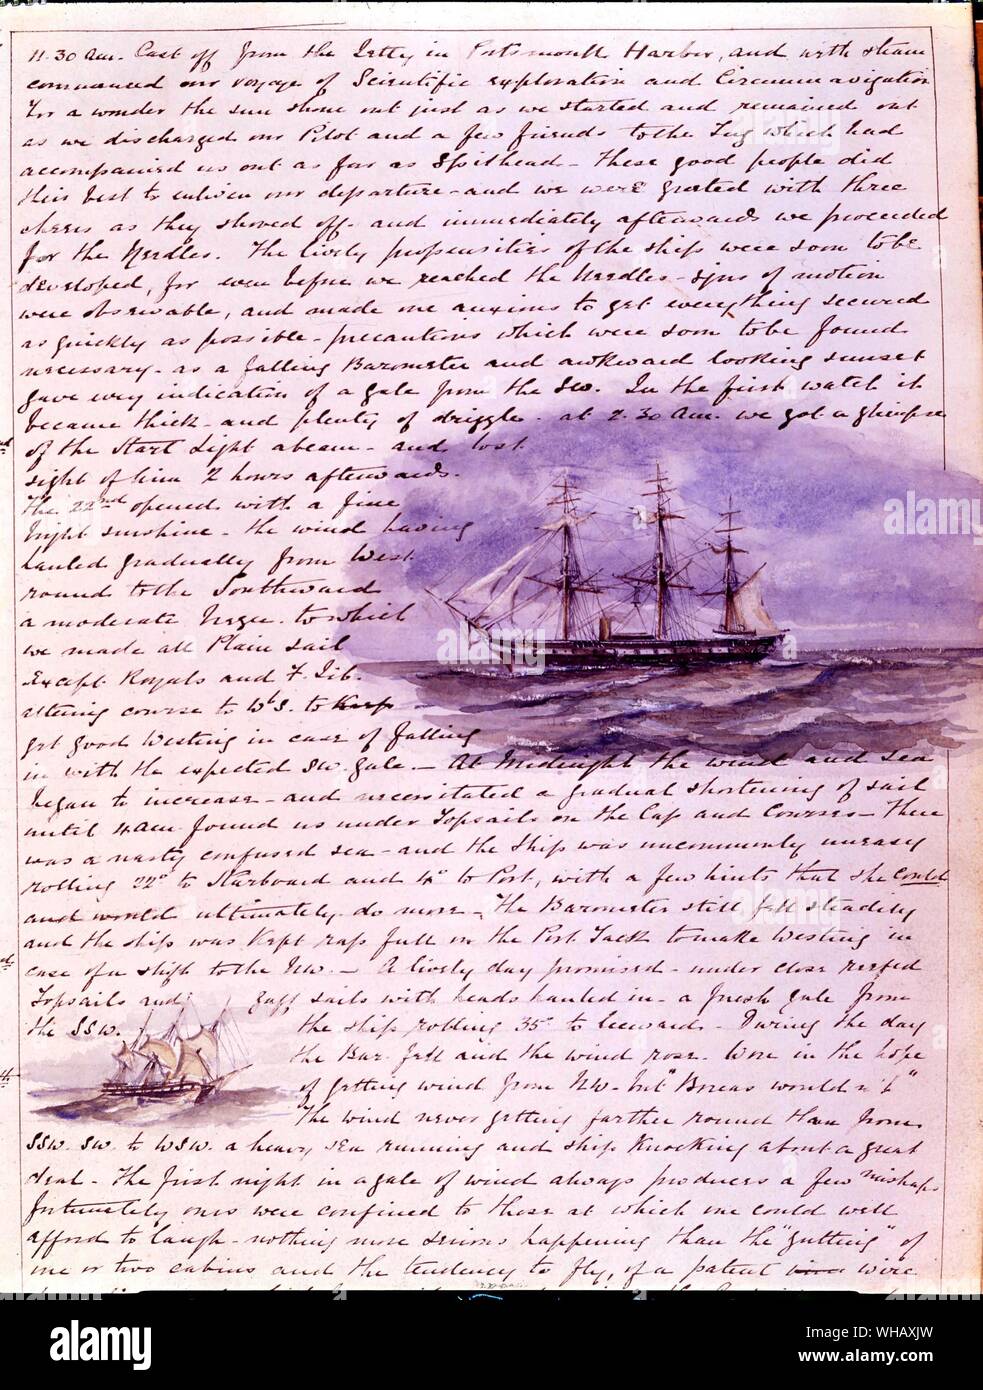 First page of Lieutenant Pelham Aldrich's Journal. The Voyage of The Challenger, by Eric Linklater page 25 and backcover. . Admiral Pelham Aldrich (1844-1930) joined the Royal Navy in 1859 and served on the Challenger Surveying Expedition, 1872-1875. He commanded survey vessels in the China Seas, the Red Sea, the Cape of Good Hope and elsewhere from 1877 to 1891. . The volume is a journal of the scientific research voyage of HMS Challenger from 1872-1875. Illustrated with watercolours and line drawings. Geographical subject headings: 1) ATLANTIC OCEAN. 2) ANTARCTIC. 3) PACIFIC OCEAN.. . Stock Photo